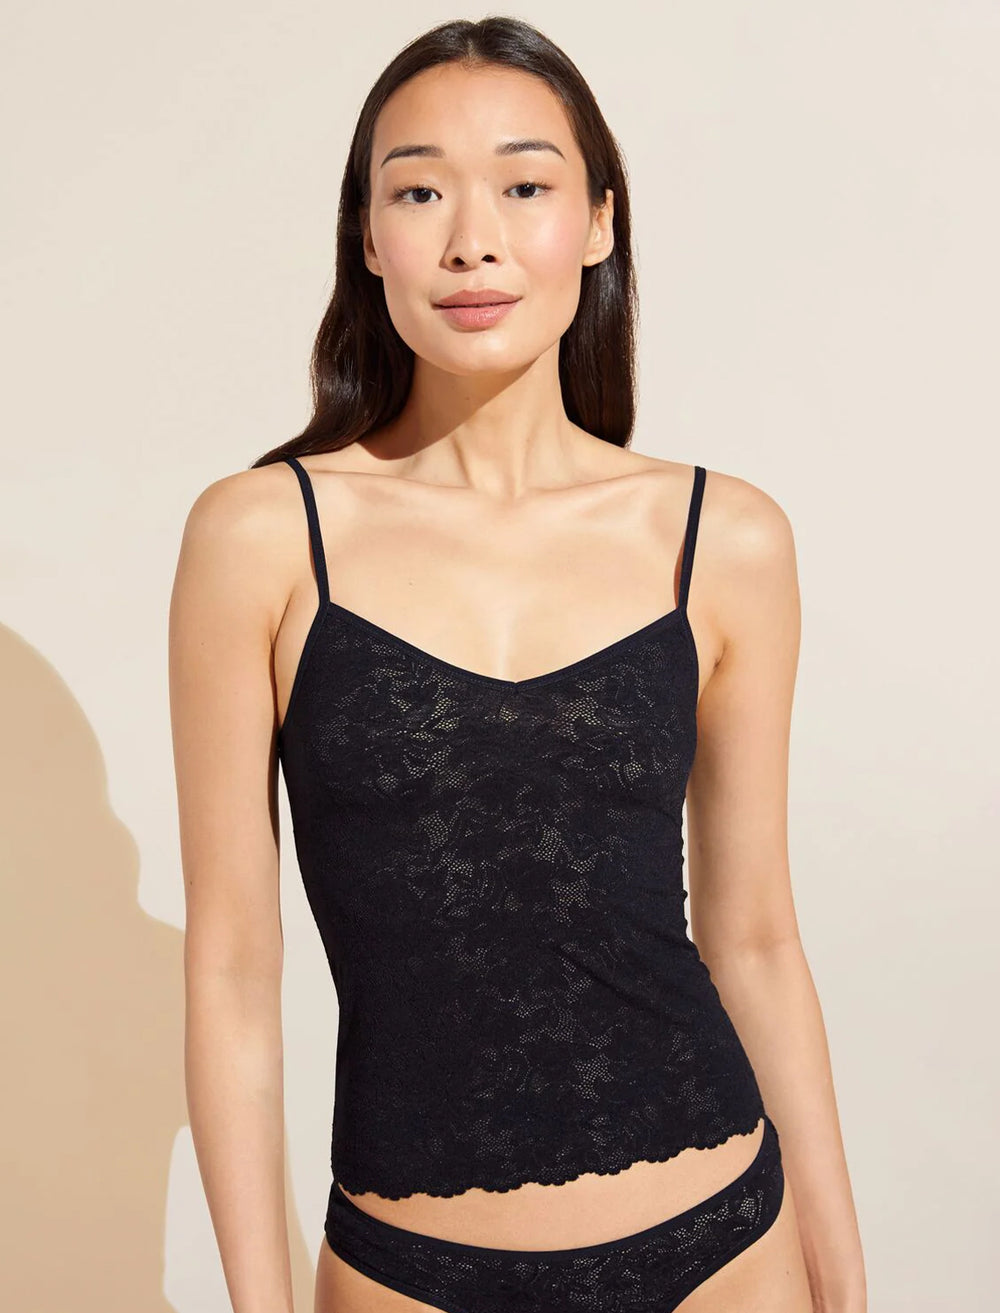 Model wearing Eberjey's soft stretch recycled lace cami in black.